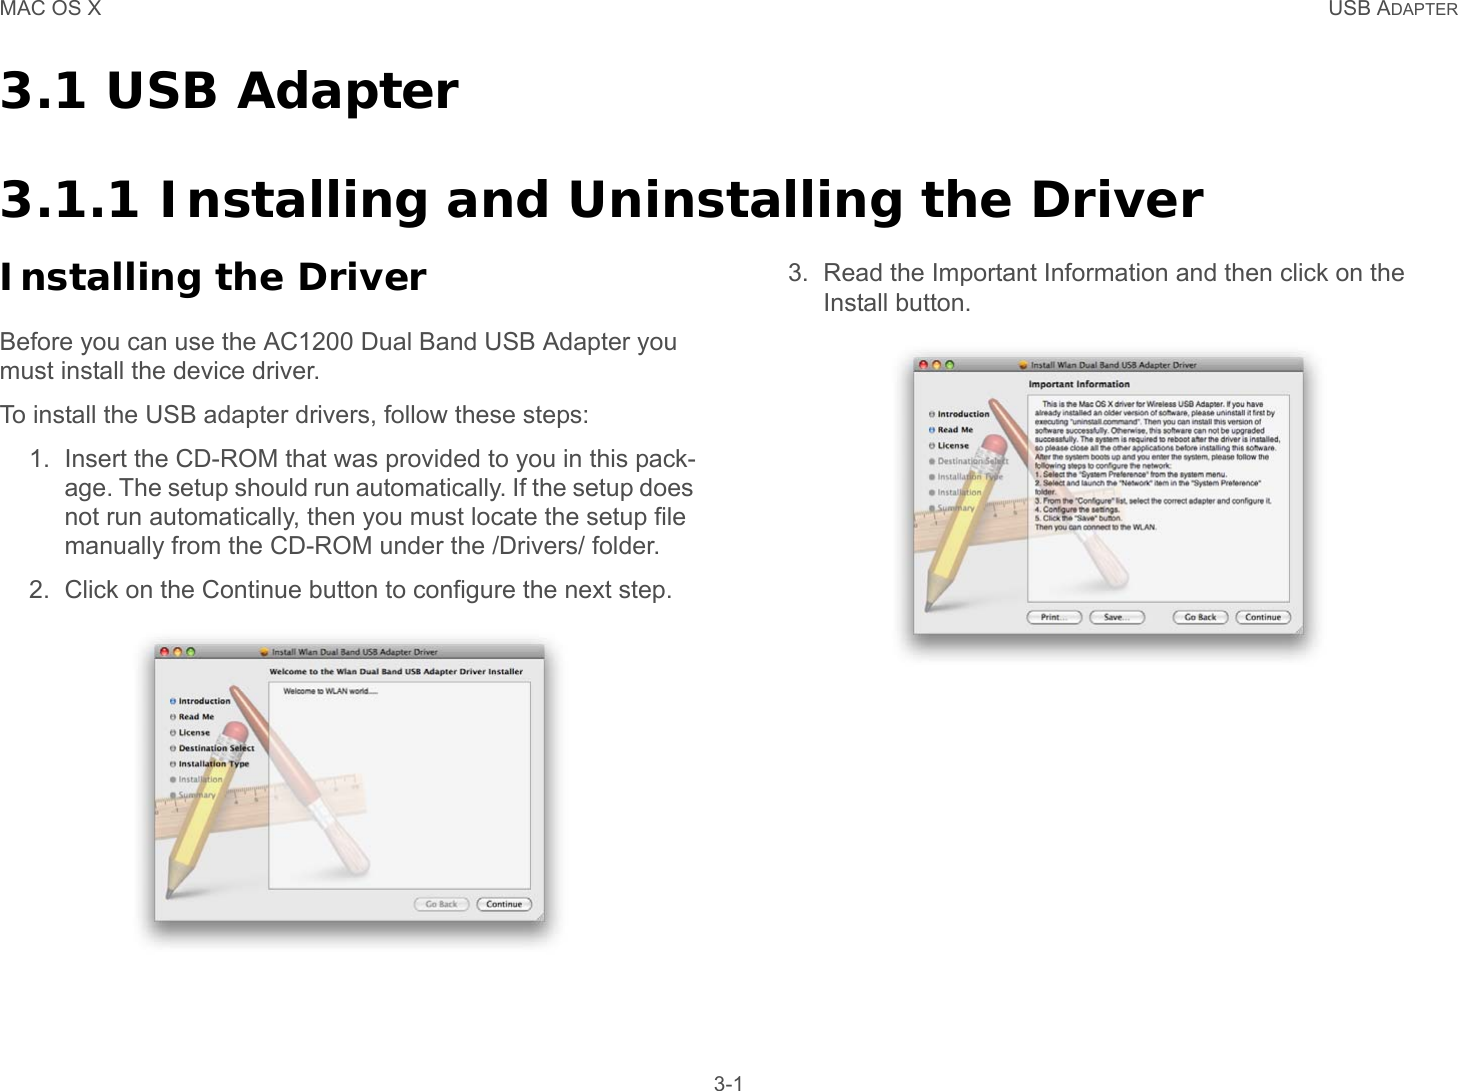 MAC OS X USB ADAPTER 3-13.1 USB Adapter3.1.1 Installing and Uninstalling the DriverInstalling the DriverBefore you can use the AC1200 Dual Band USB Adapter you must install the device driver.To install the USB adapter drivers, follow these steps:1. Insert the CD-ROM that was provided to you in this pack-age. The setup should run automatically. If the setup does not run automatically, then you must locate the setup file manually from the CD-ROM under the /Drivers/ folder.2. Click on the Continue button to configure the next step.3. Read the Important Information and then click on the Install button.